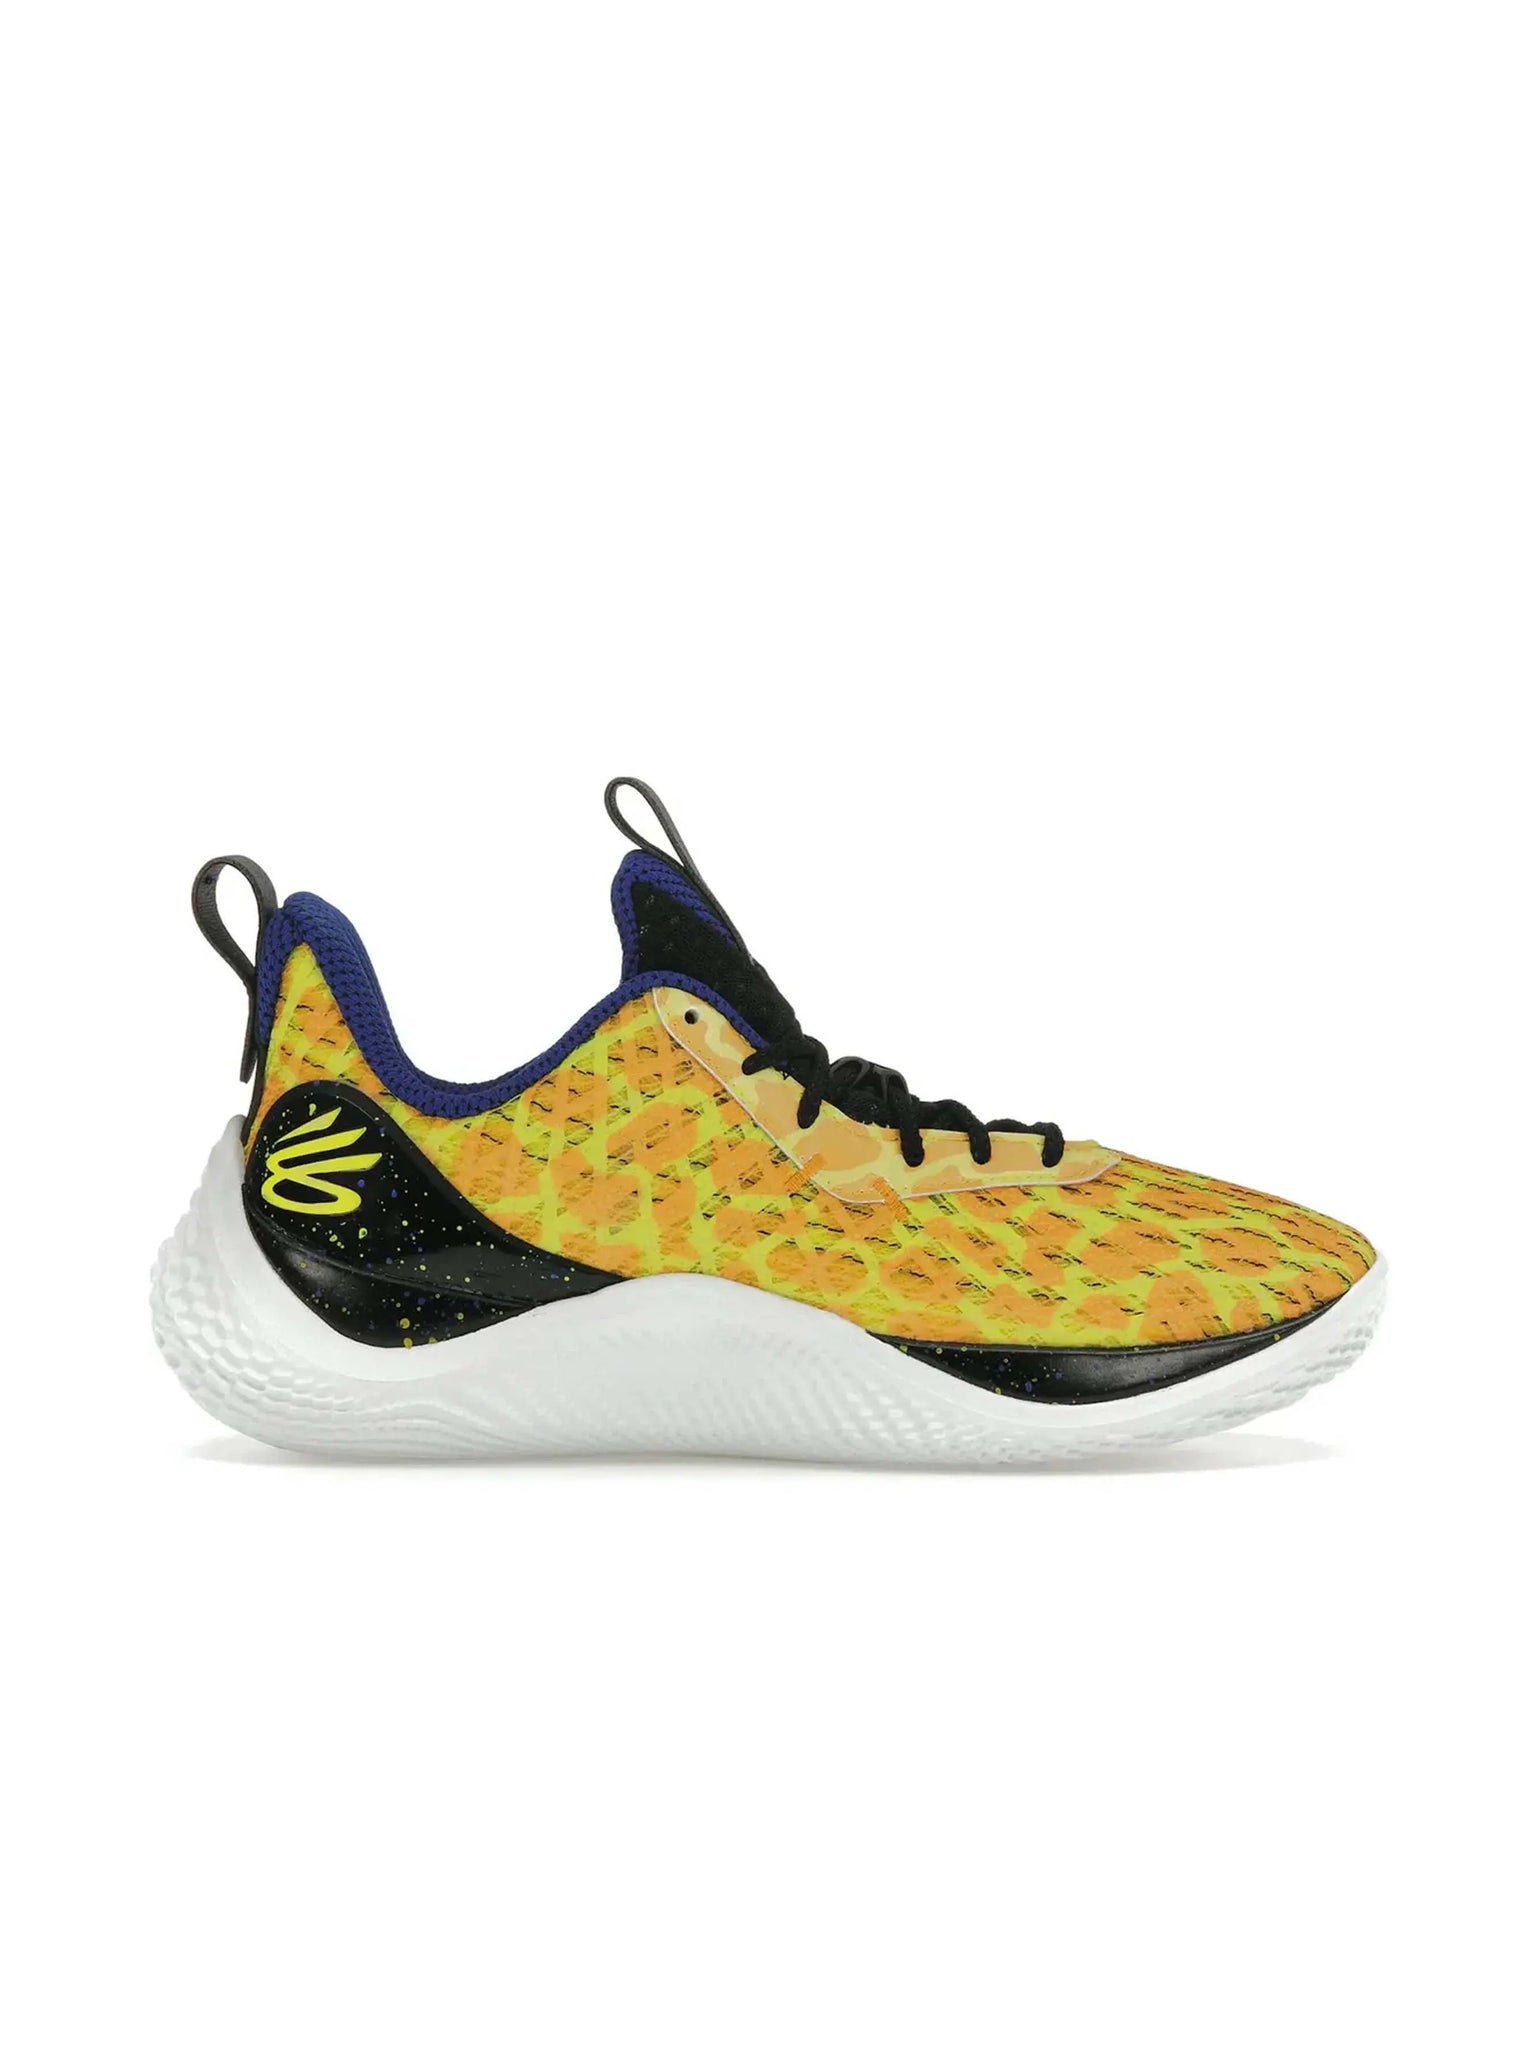 Under Armour Curry Flow 10 Bang Bang in Melbourne, Australia - Prior